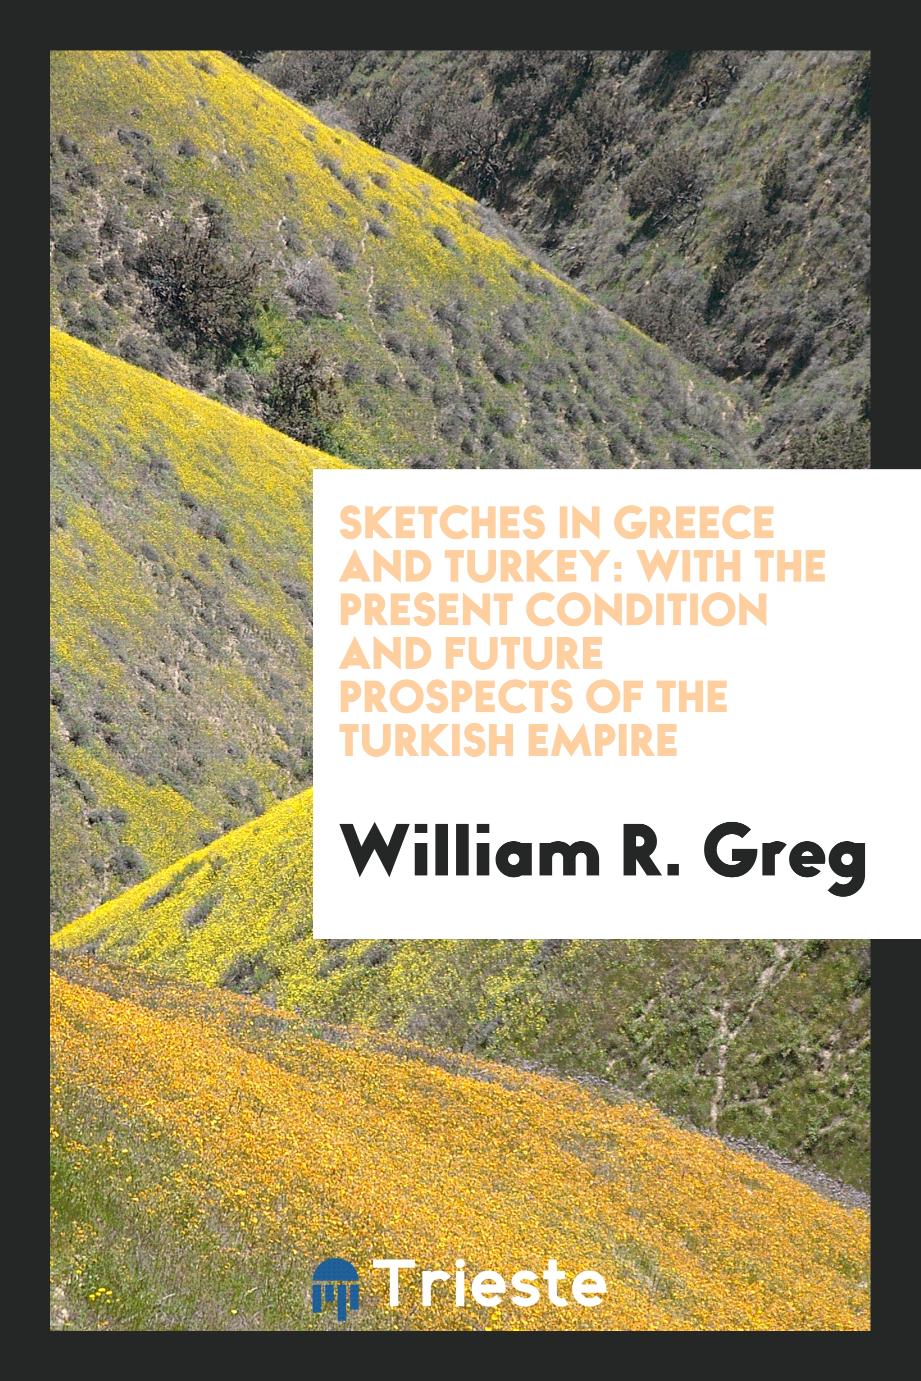 Sketches in Greece and Turkey: with the present condition and future prospects of the Turkish empire